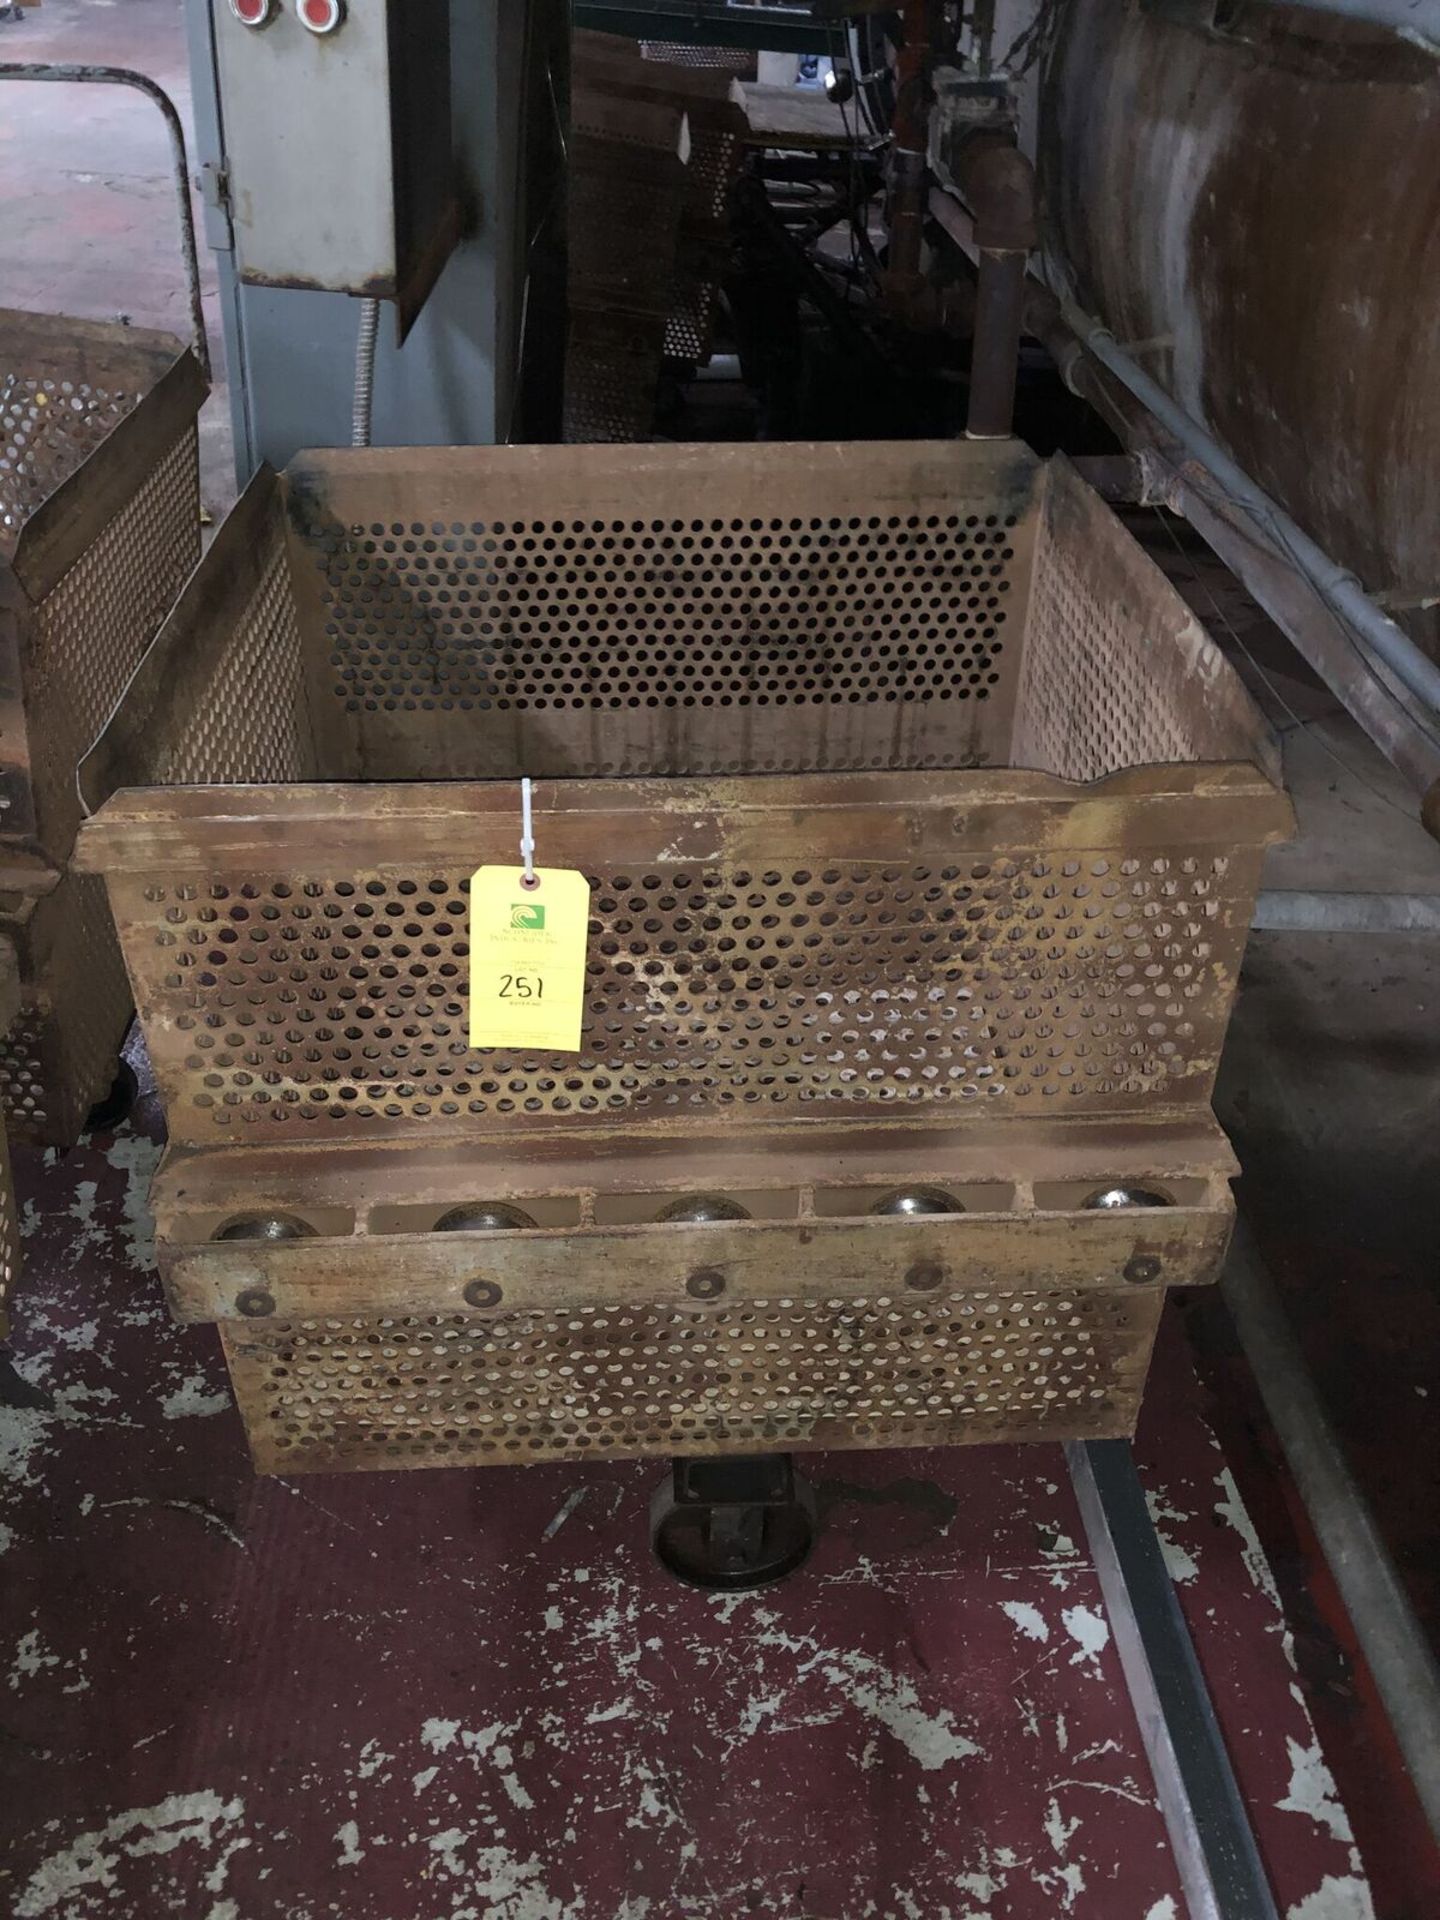 Square Steel Basket, L = 33'', W = 33'', H = 40'' Estimated Weight 500 Lbs Baskets Used W/ Autoclave